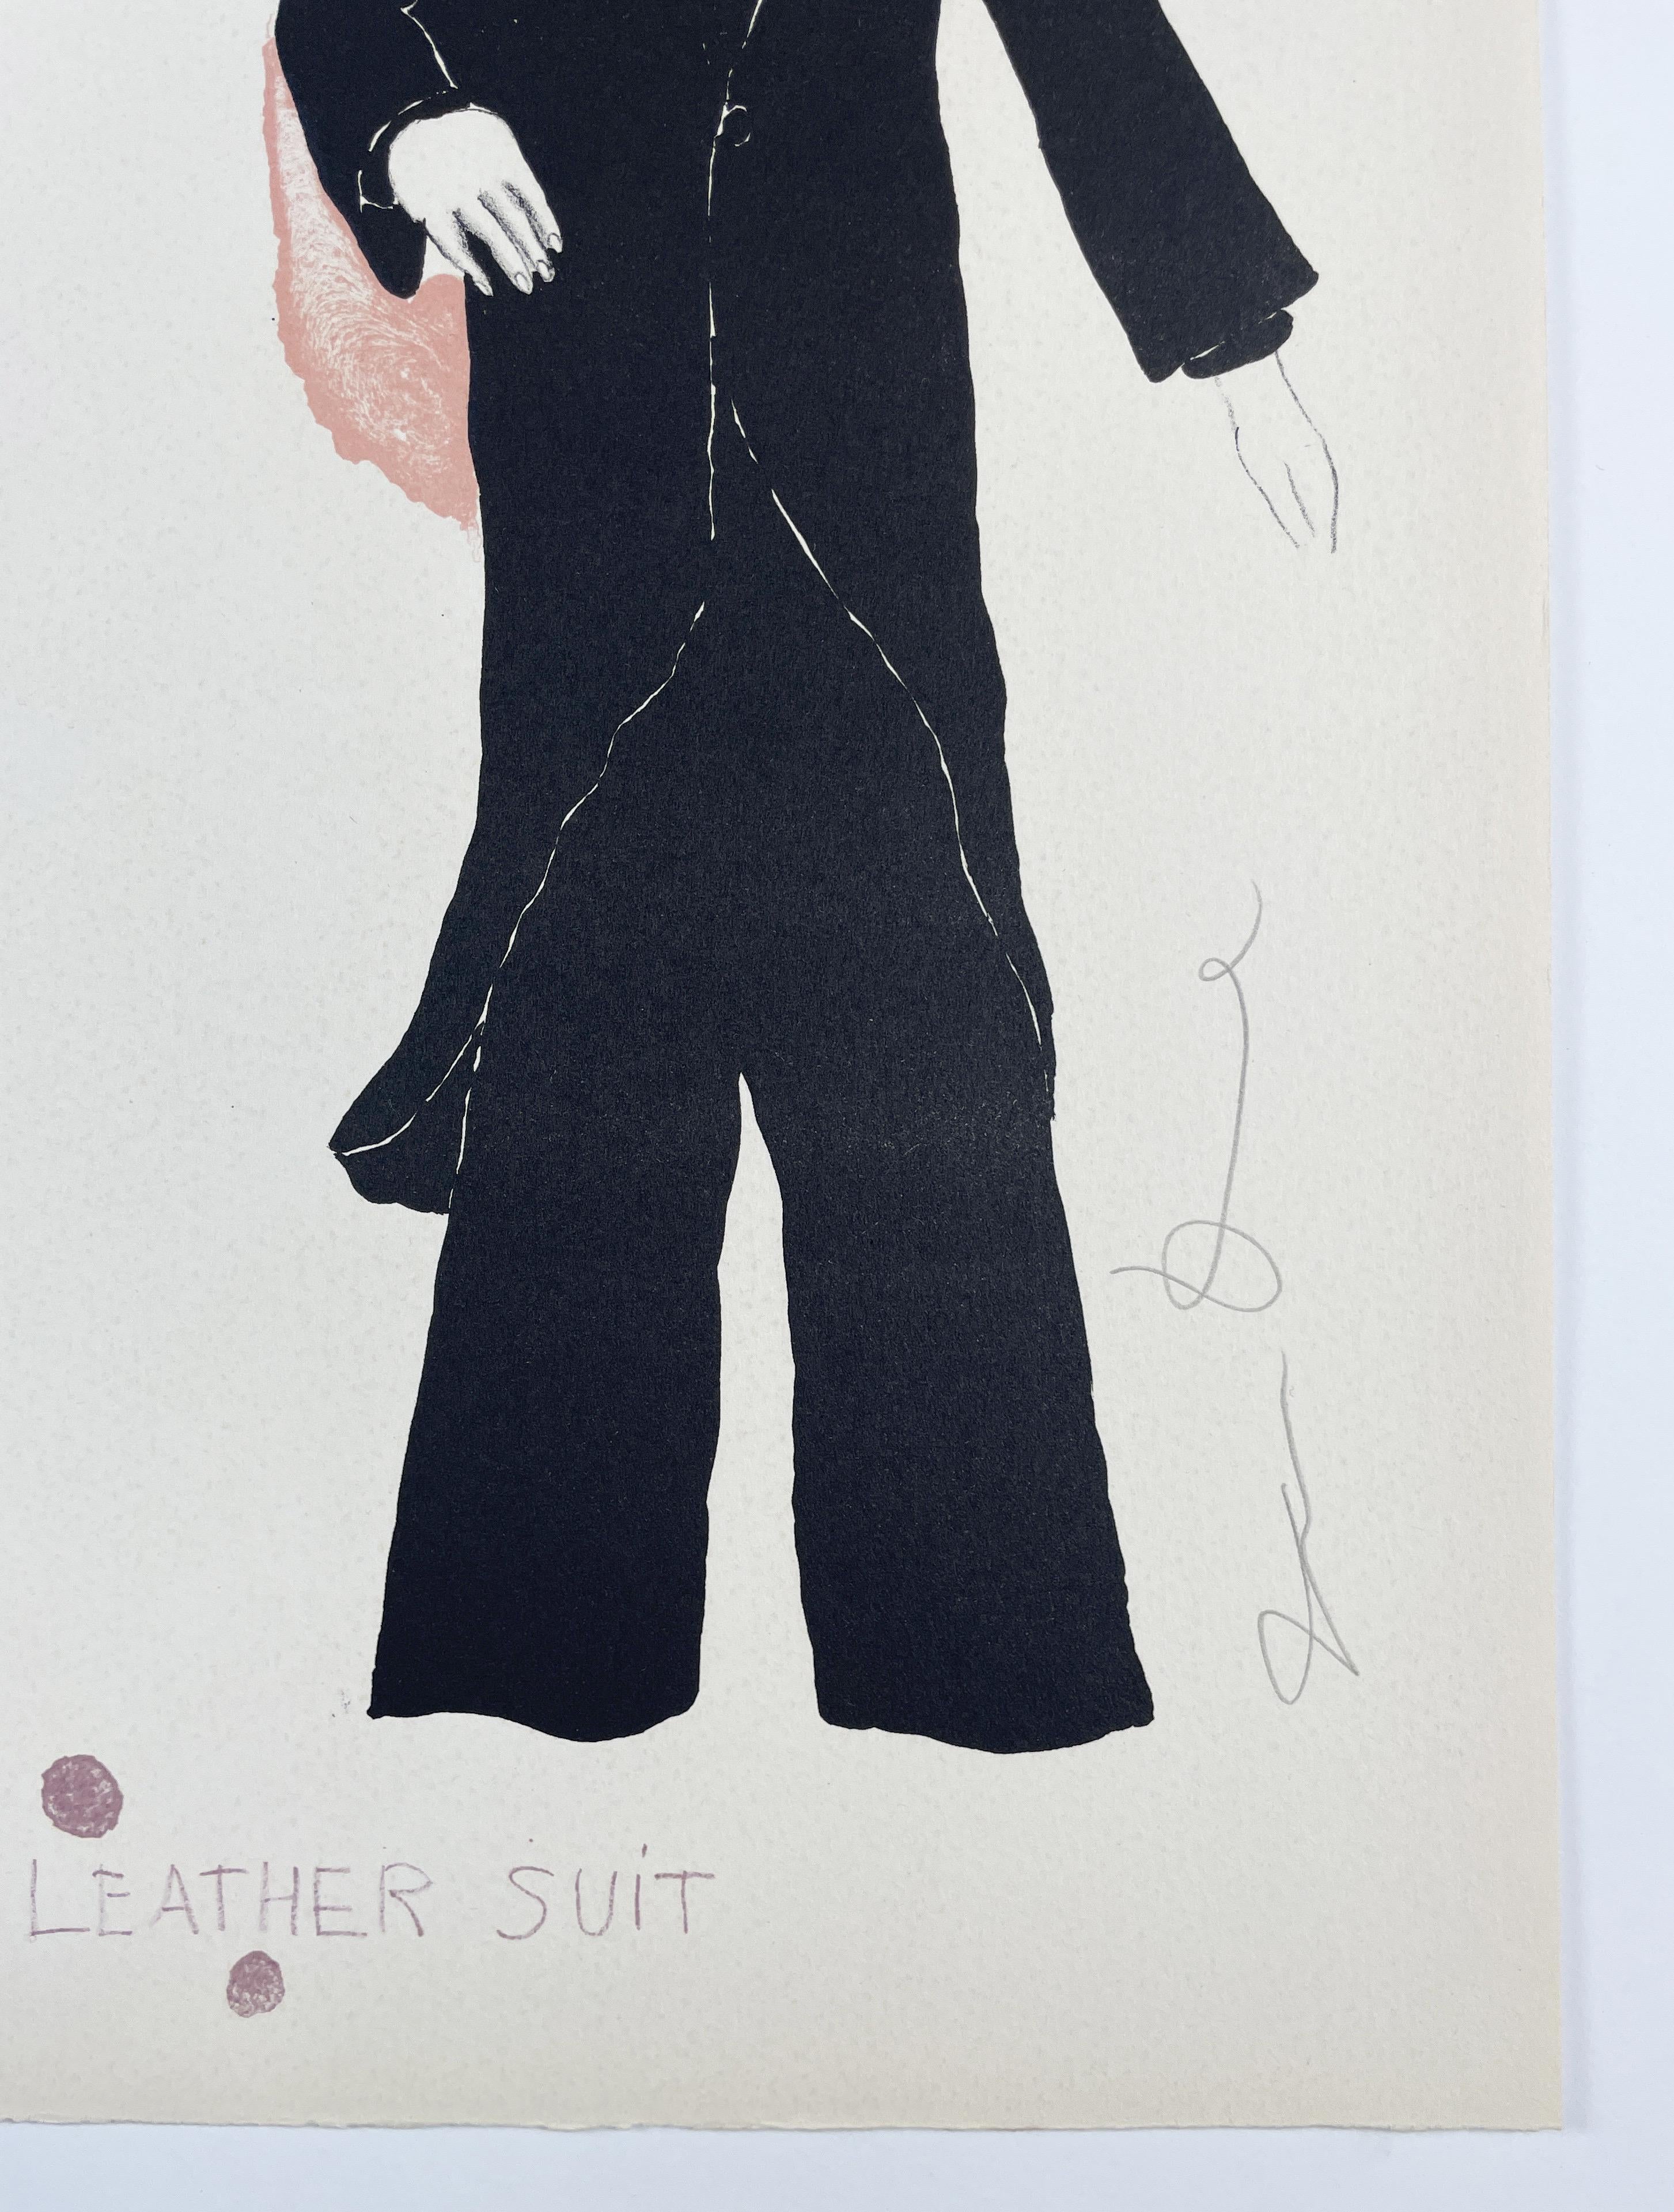 Jim Dine Basil in Black Leather Suit from 